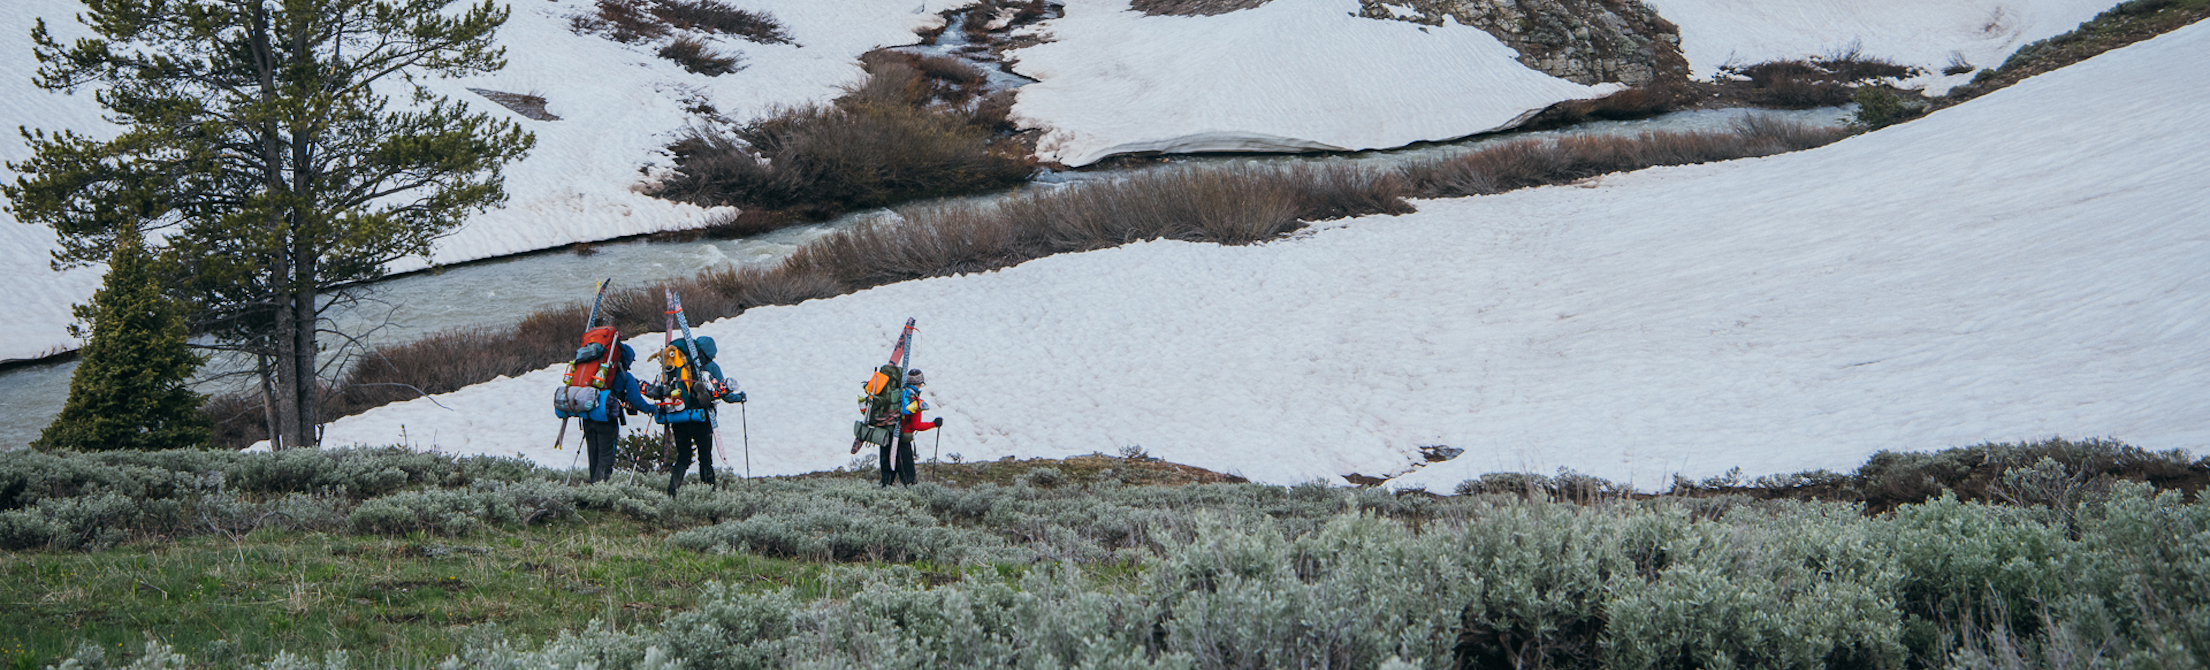 Three people carry backpacks with skis on them through the sagebrush and snow along a river.